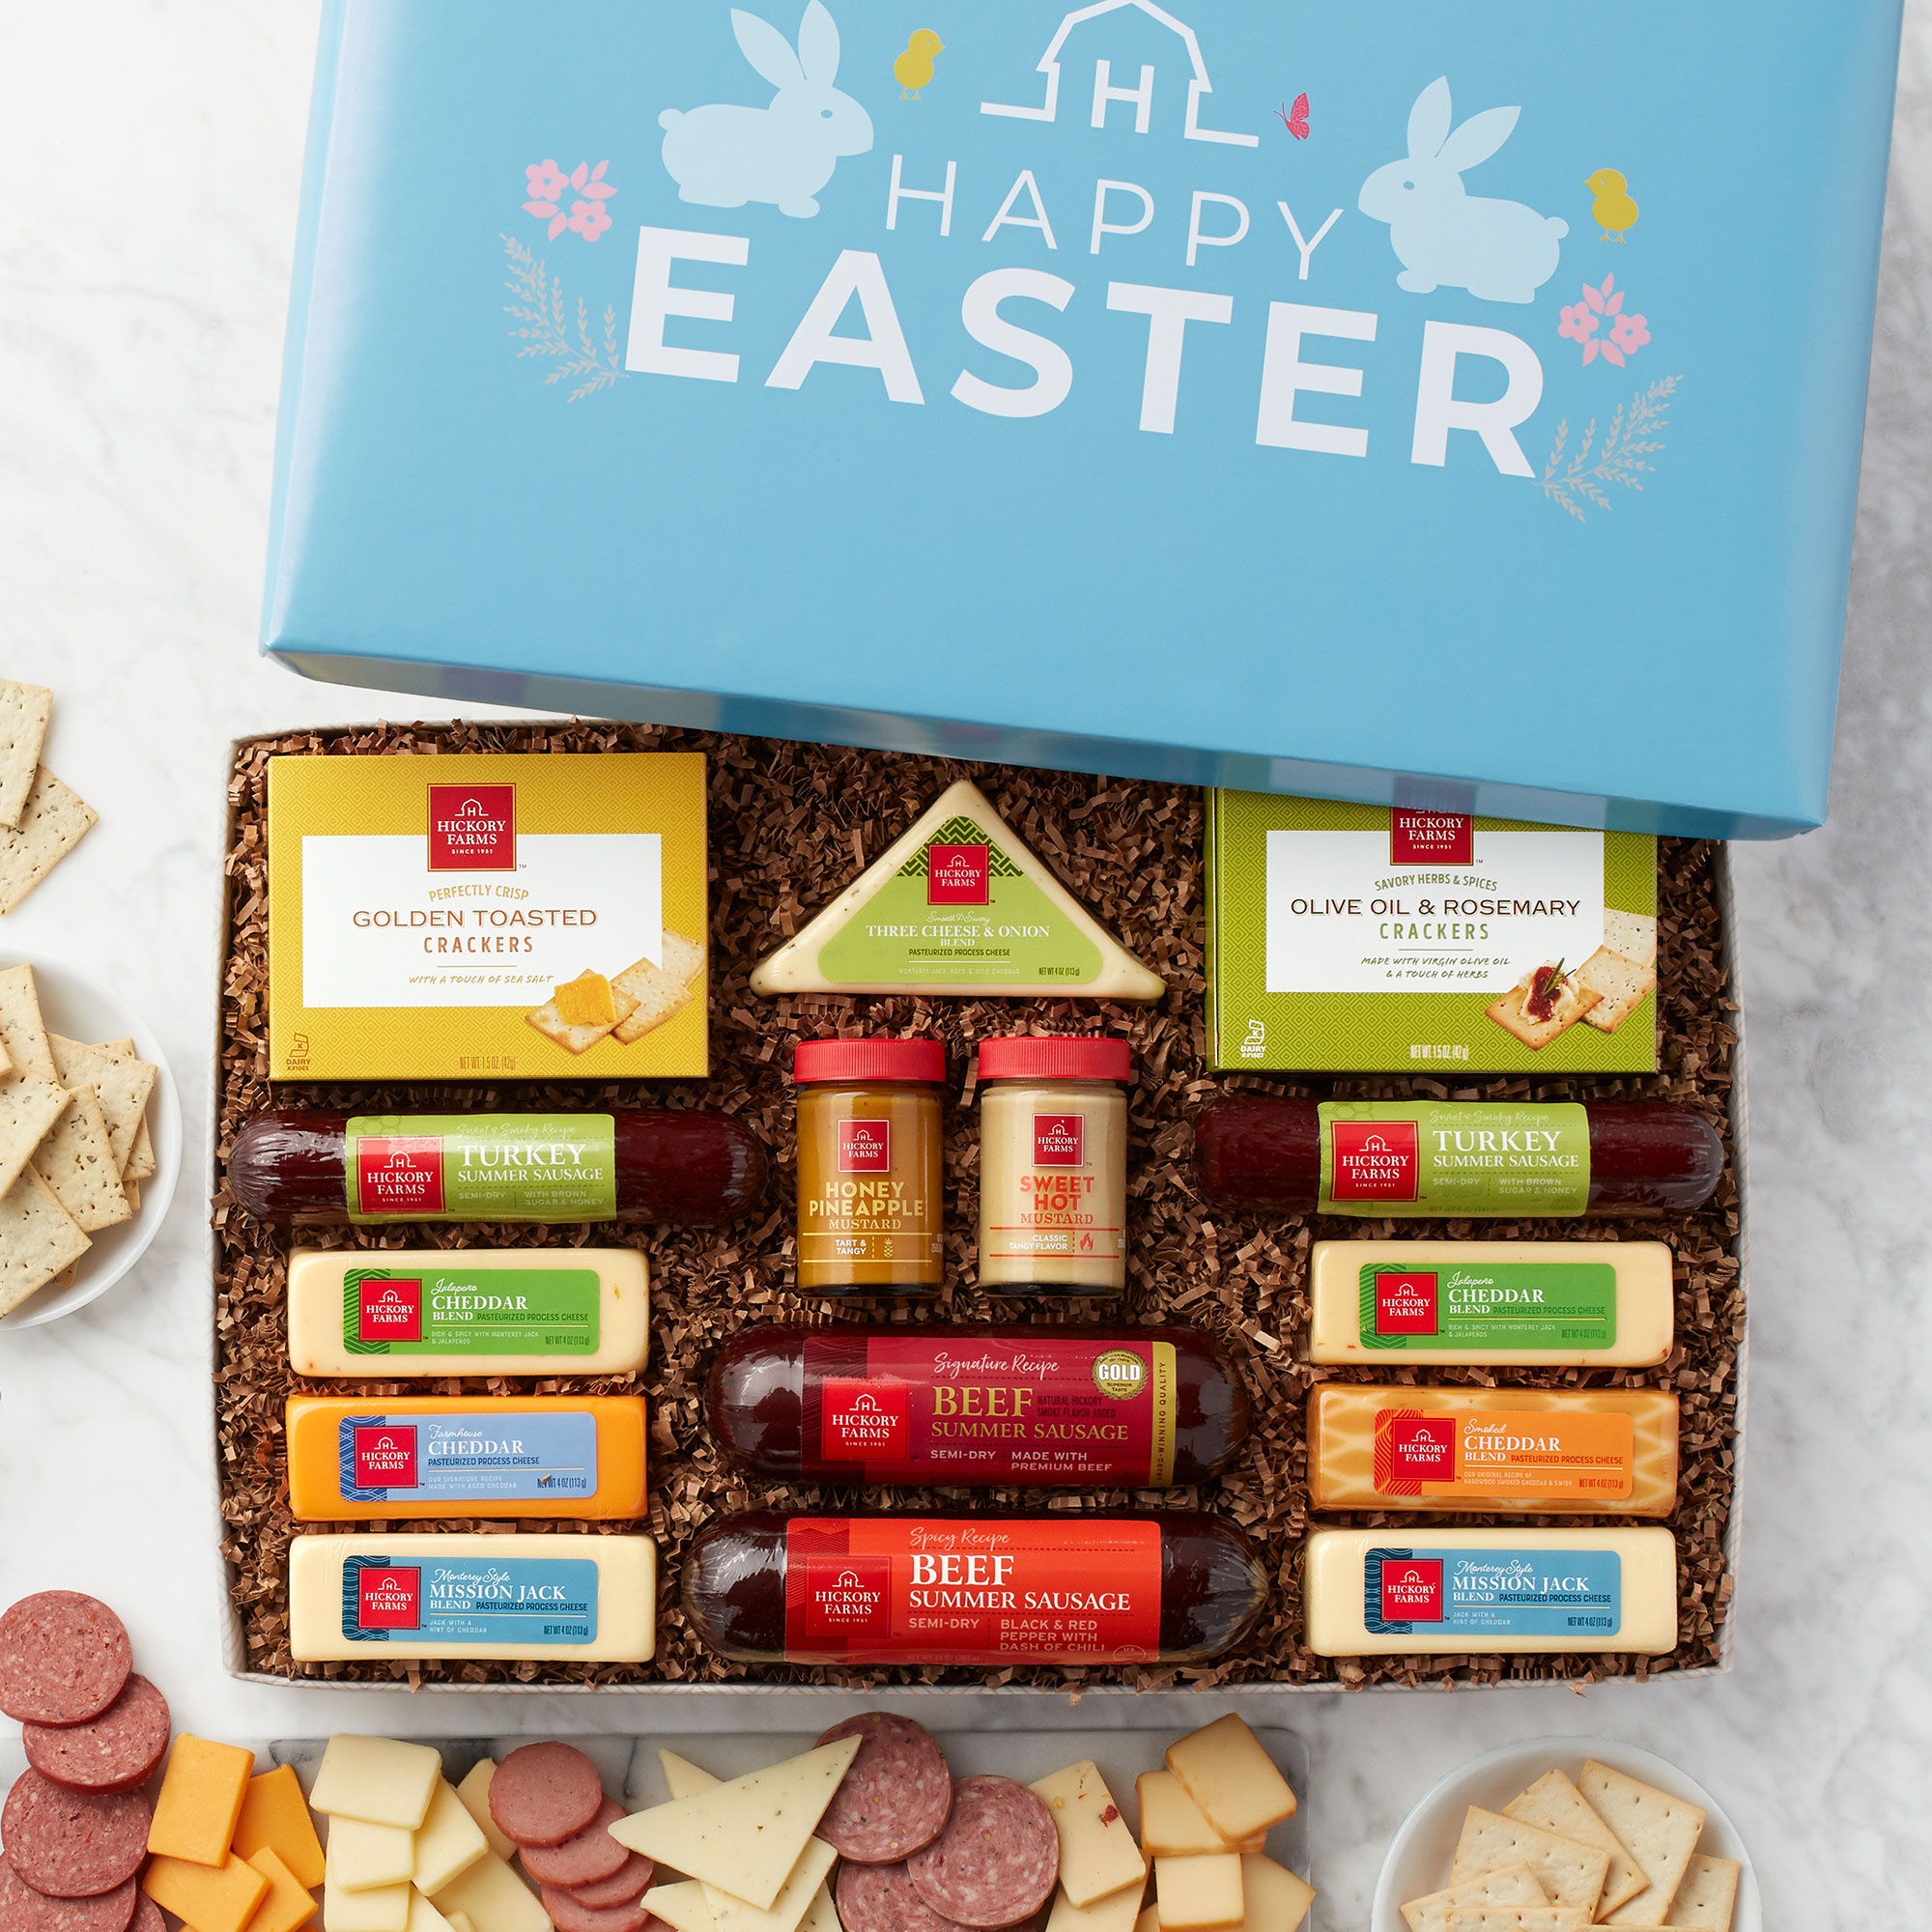 https://www.hickoryfarms.com/on/demandware.static/-/Sites-Web-Master-Catalog/default/dw3663fb66/images/products/easter-hearty-party-gift-box-003564-1.jpg